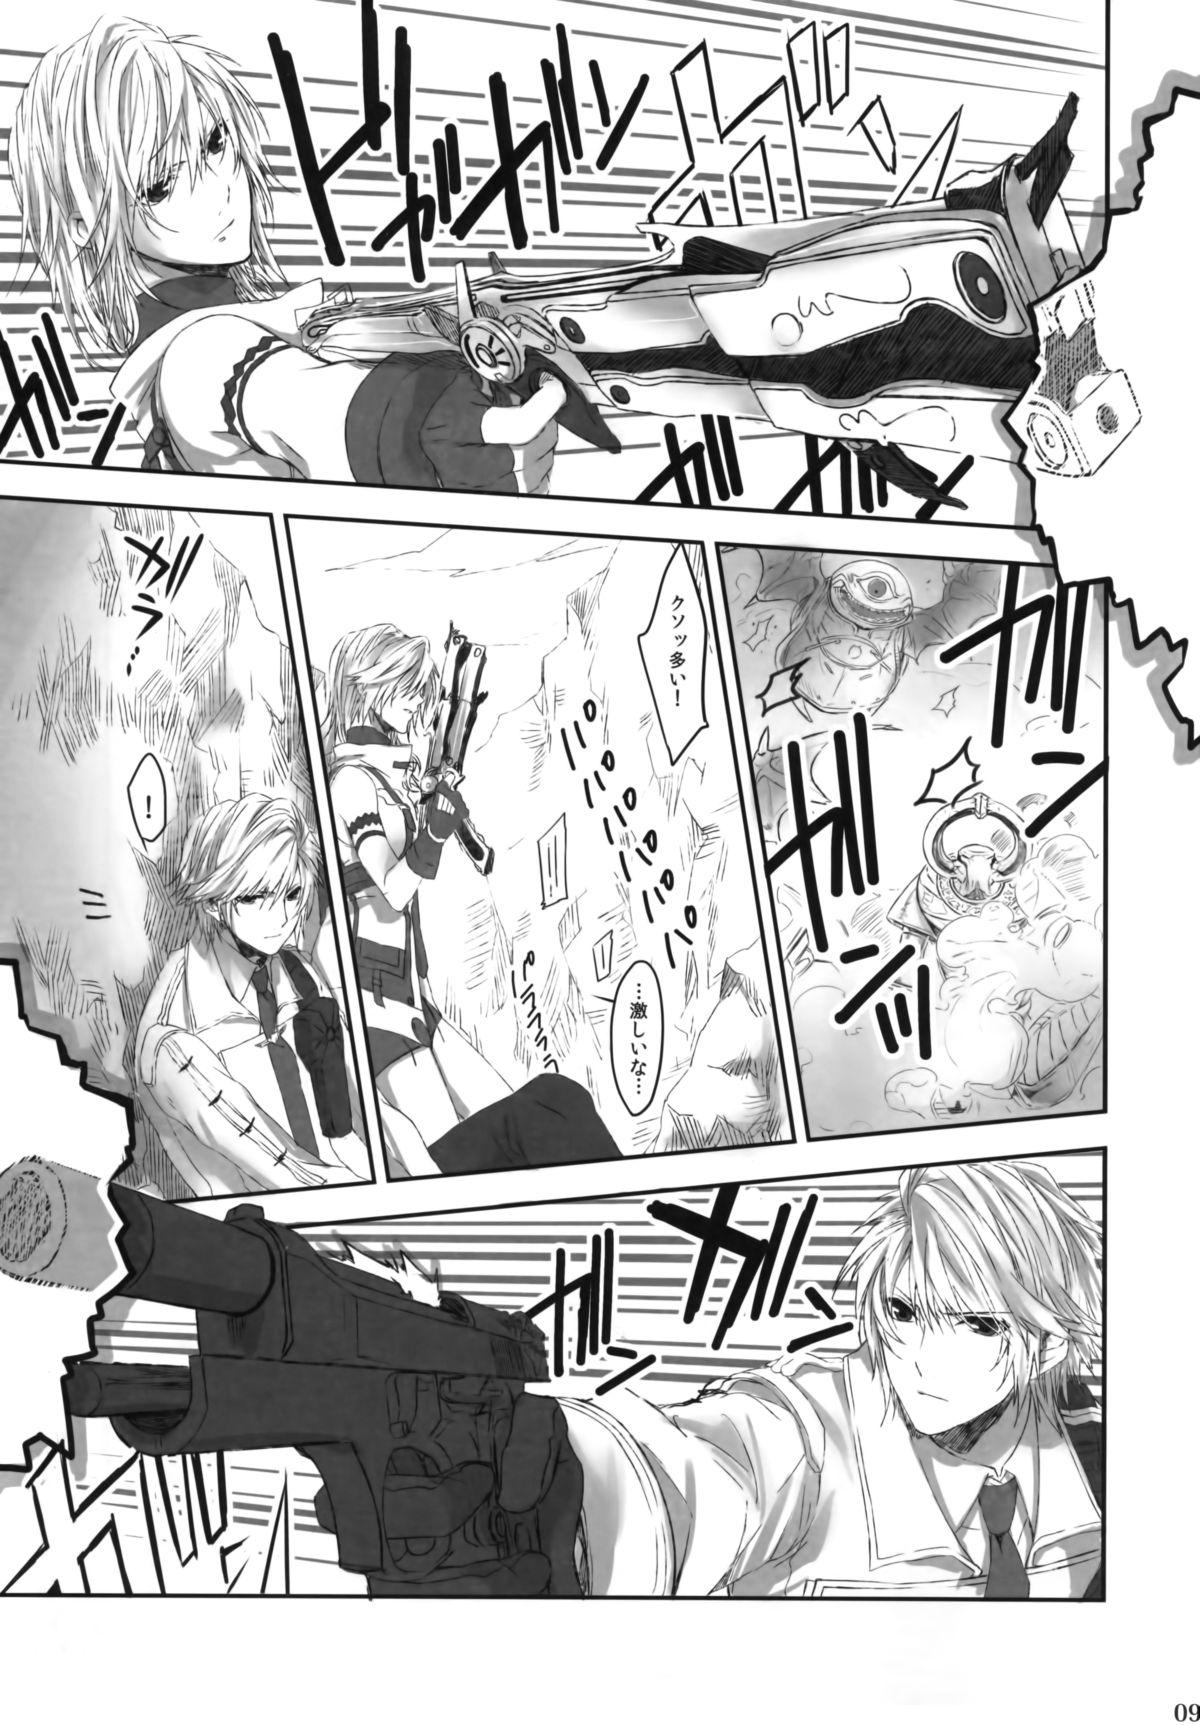 Best Blowjob Ever Because of You - Final fantasy xiii Hot Fuck - Page 9